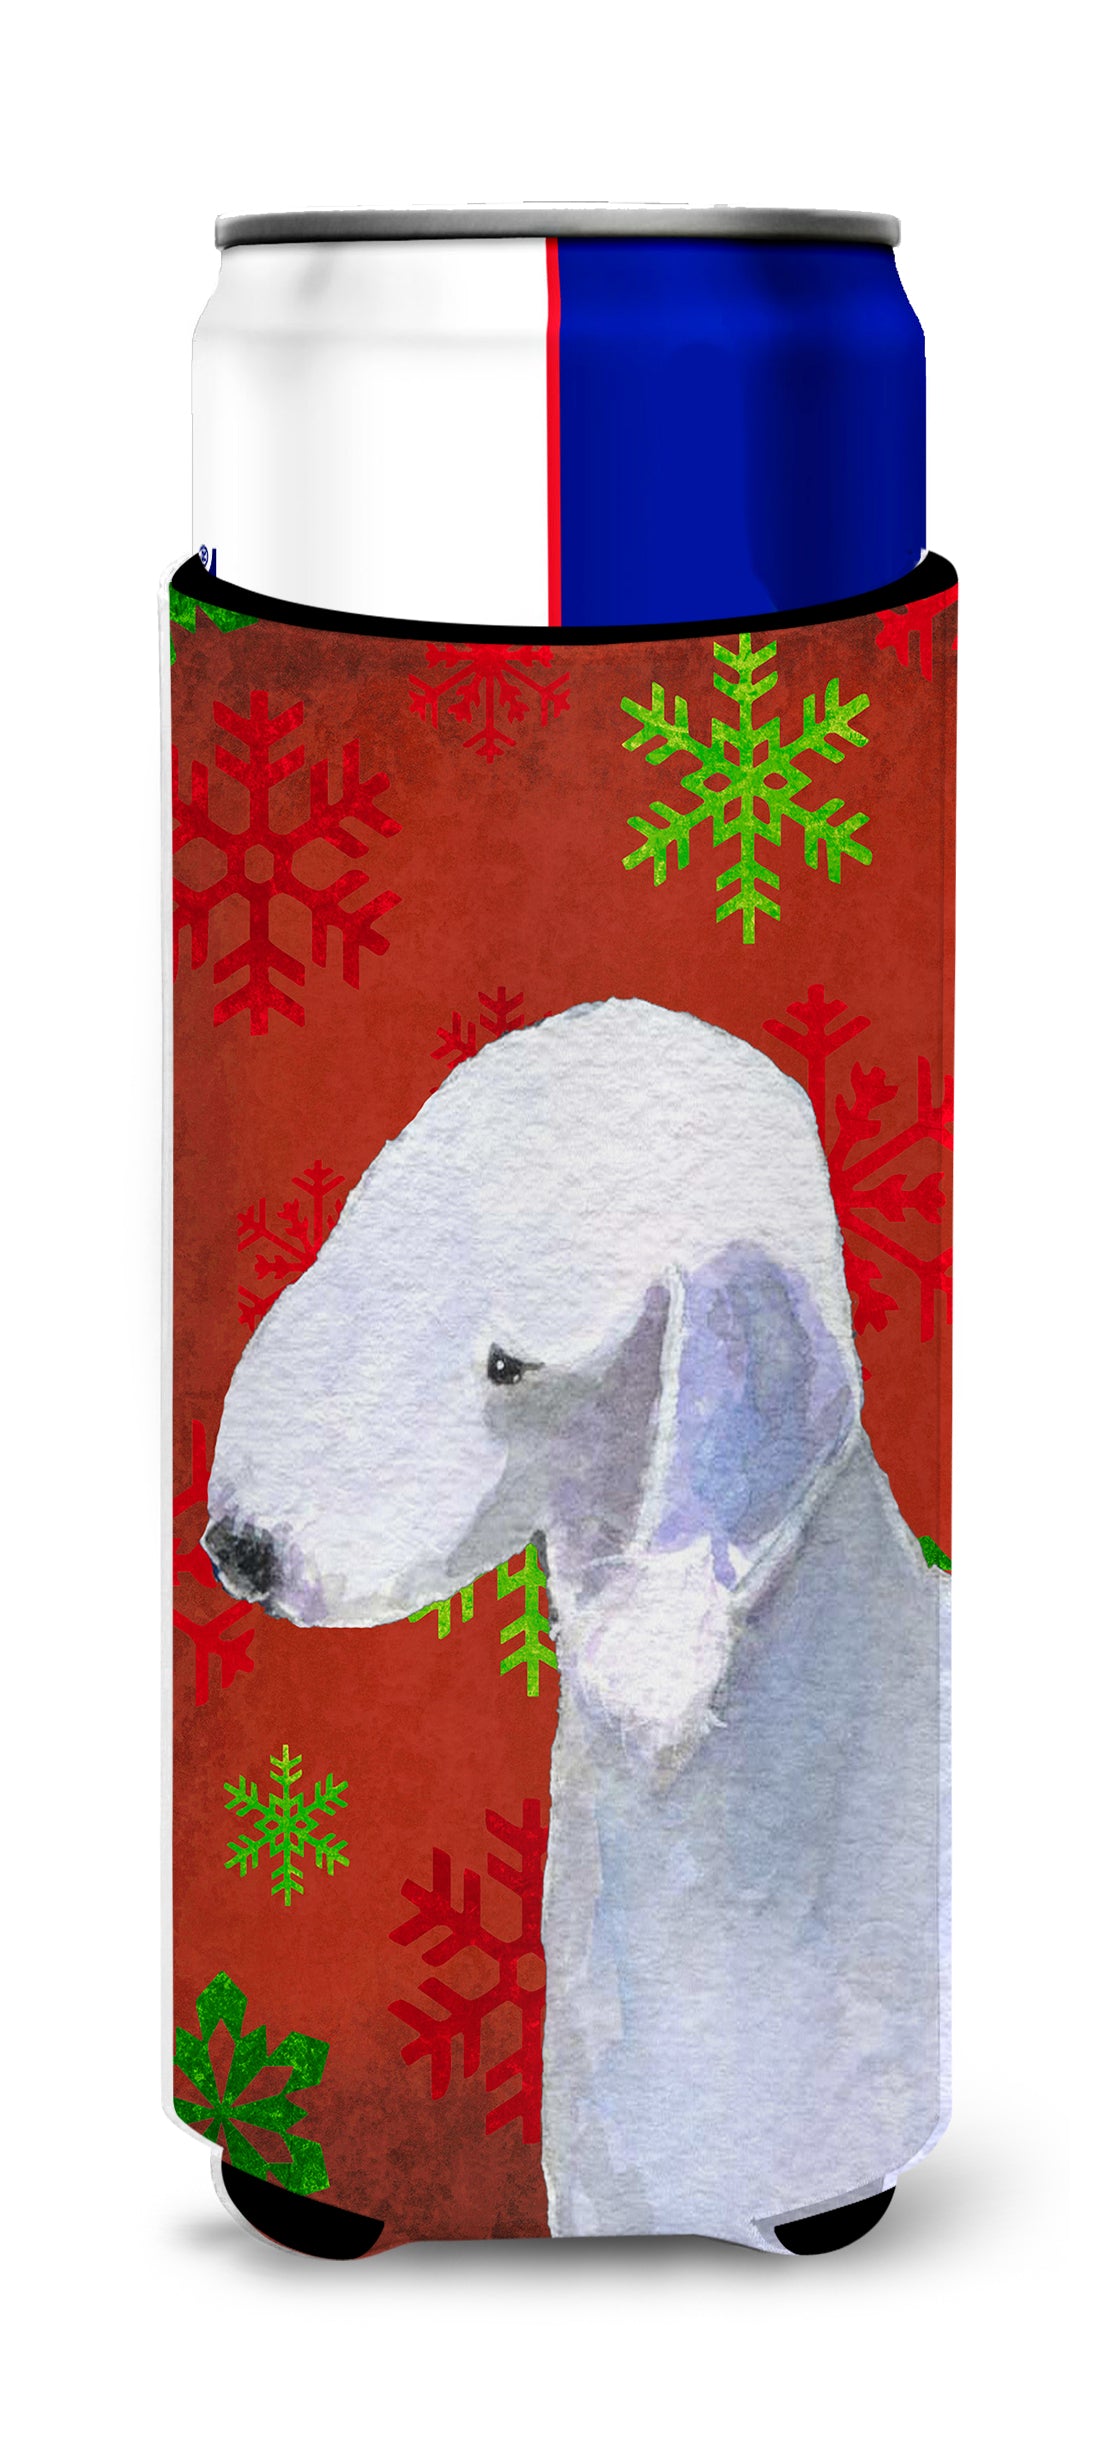 Bedlington Terrier Red and Green Snowflakes Holiday Christmas Ultra Beverage Insulators for slim cans SS4690MUK